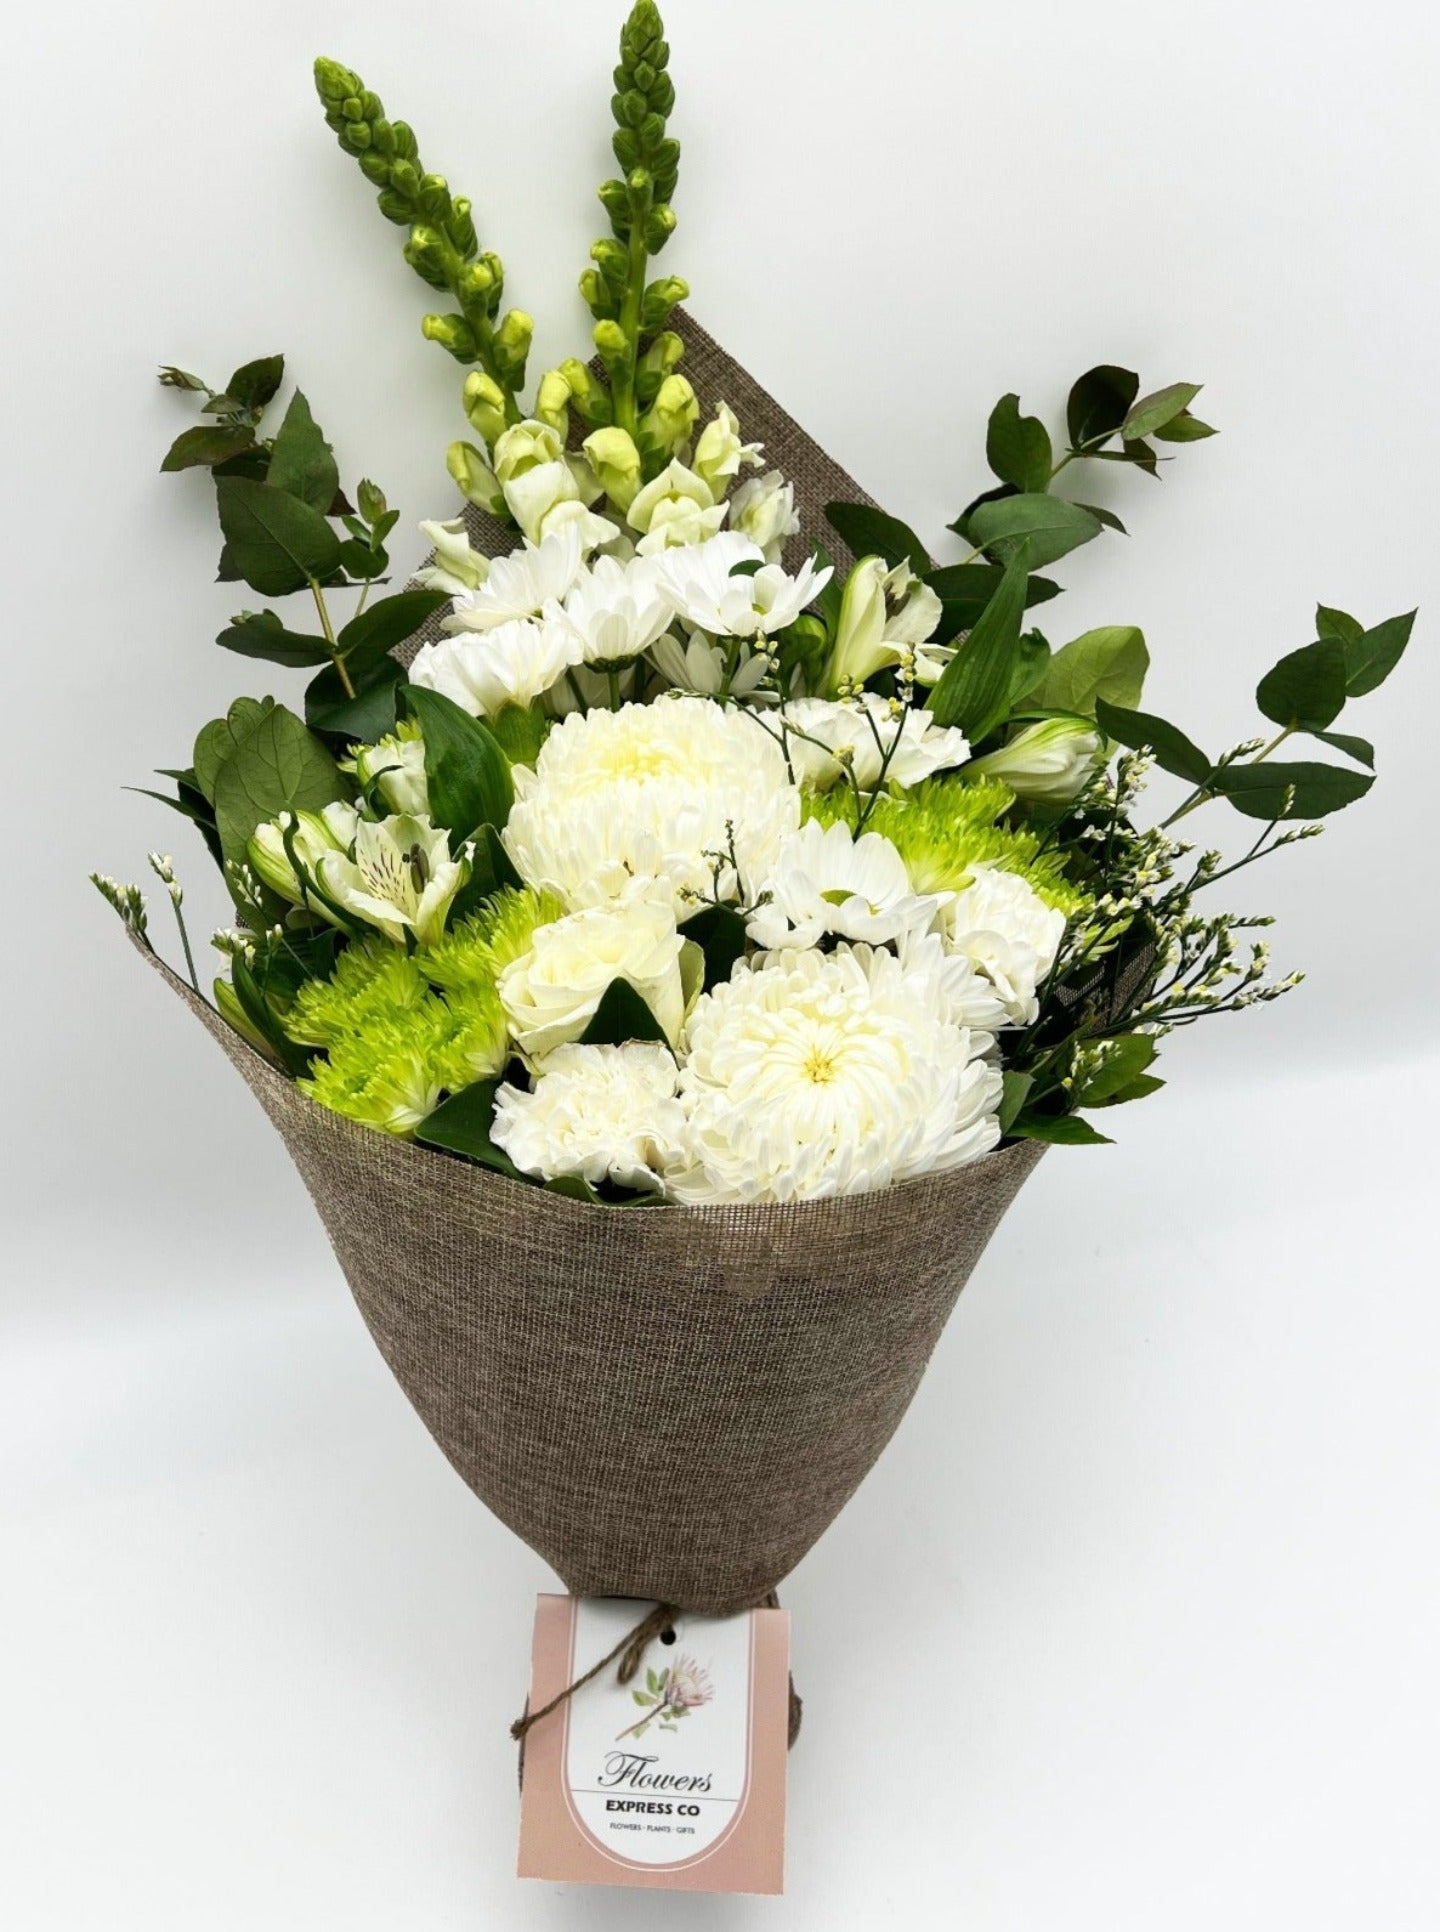 A bouquet of white and green flowers on a white background, wrapped by jute and made by Flowers Express Co in Melbourne.